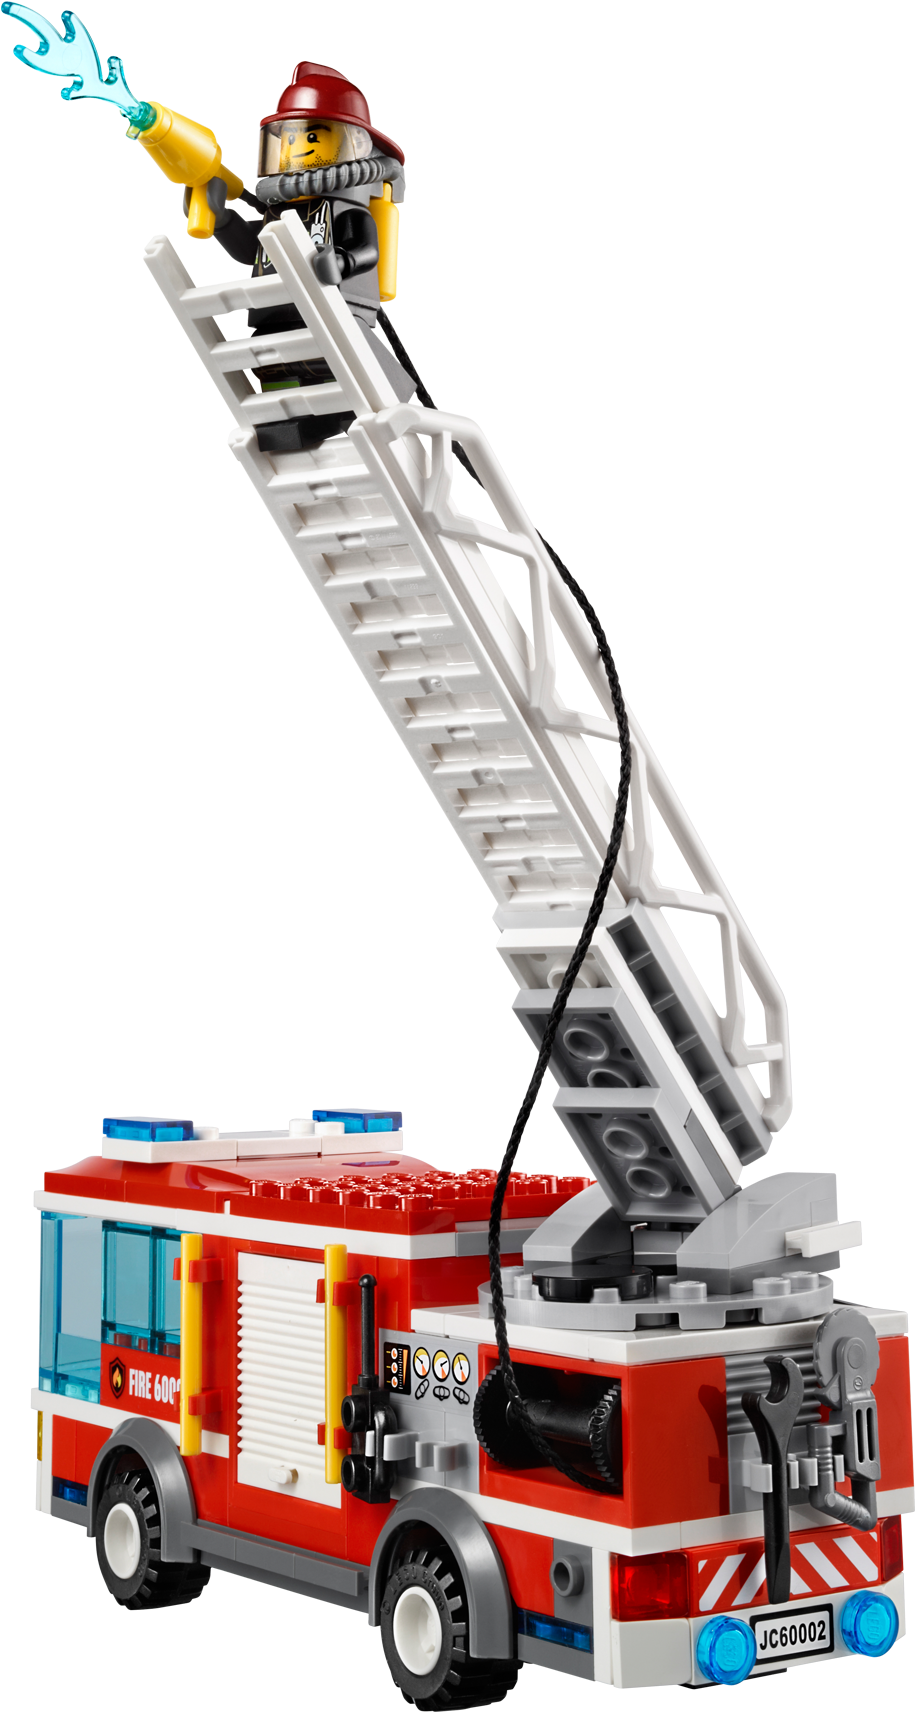 A Toy Fire Engine With A Ladder